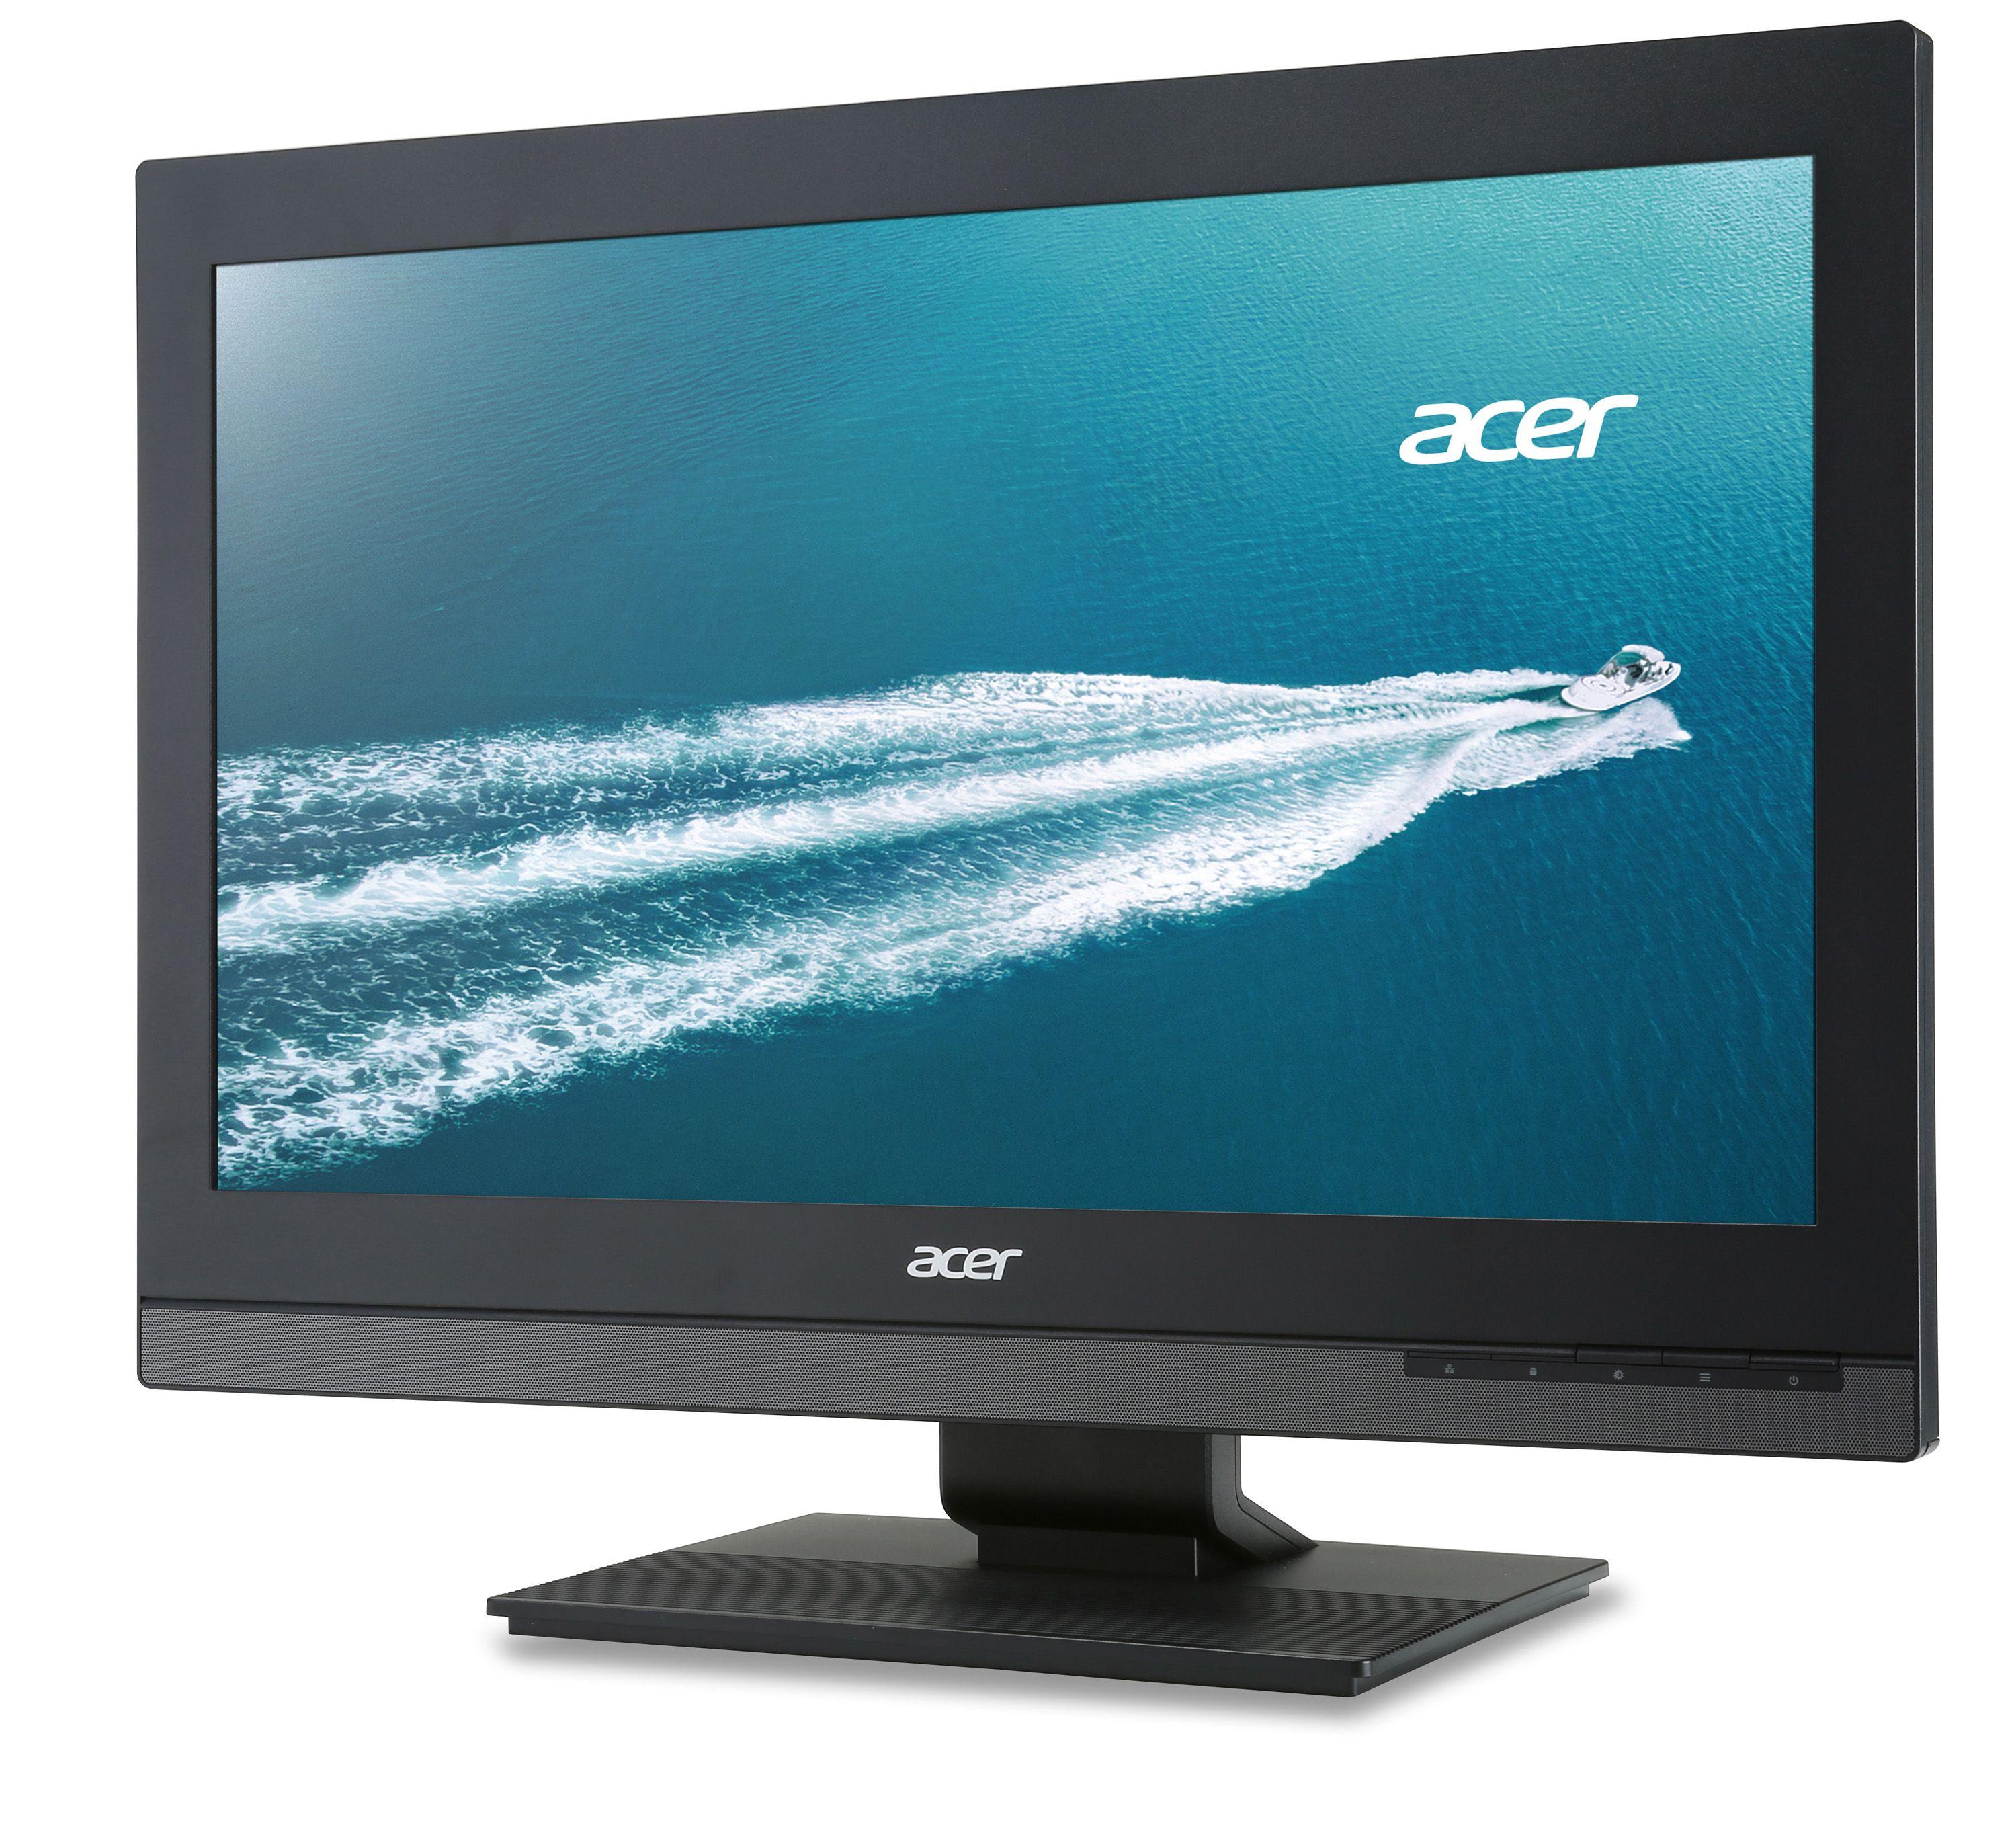 New Acer Veriton Z4810G AiO; Security, Power and Manageability